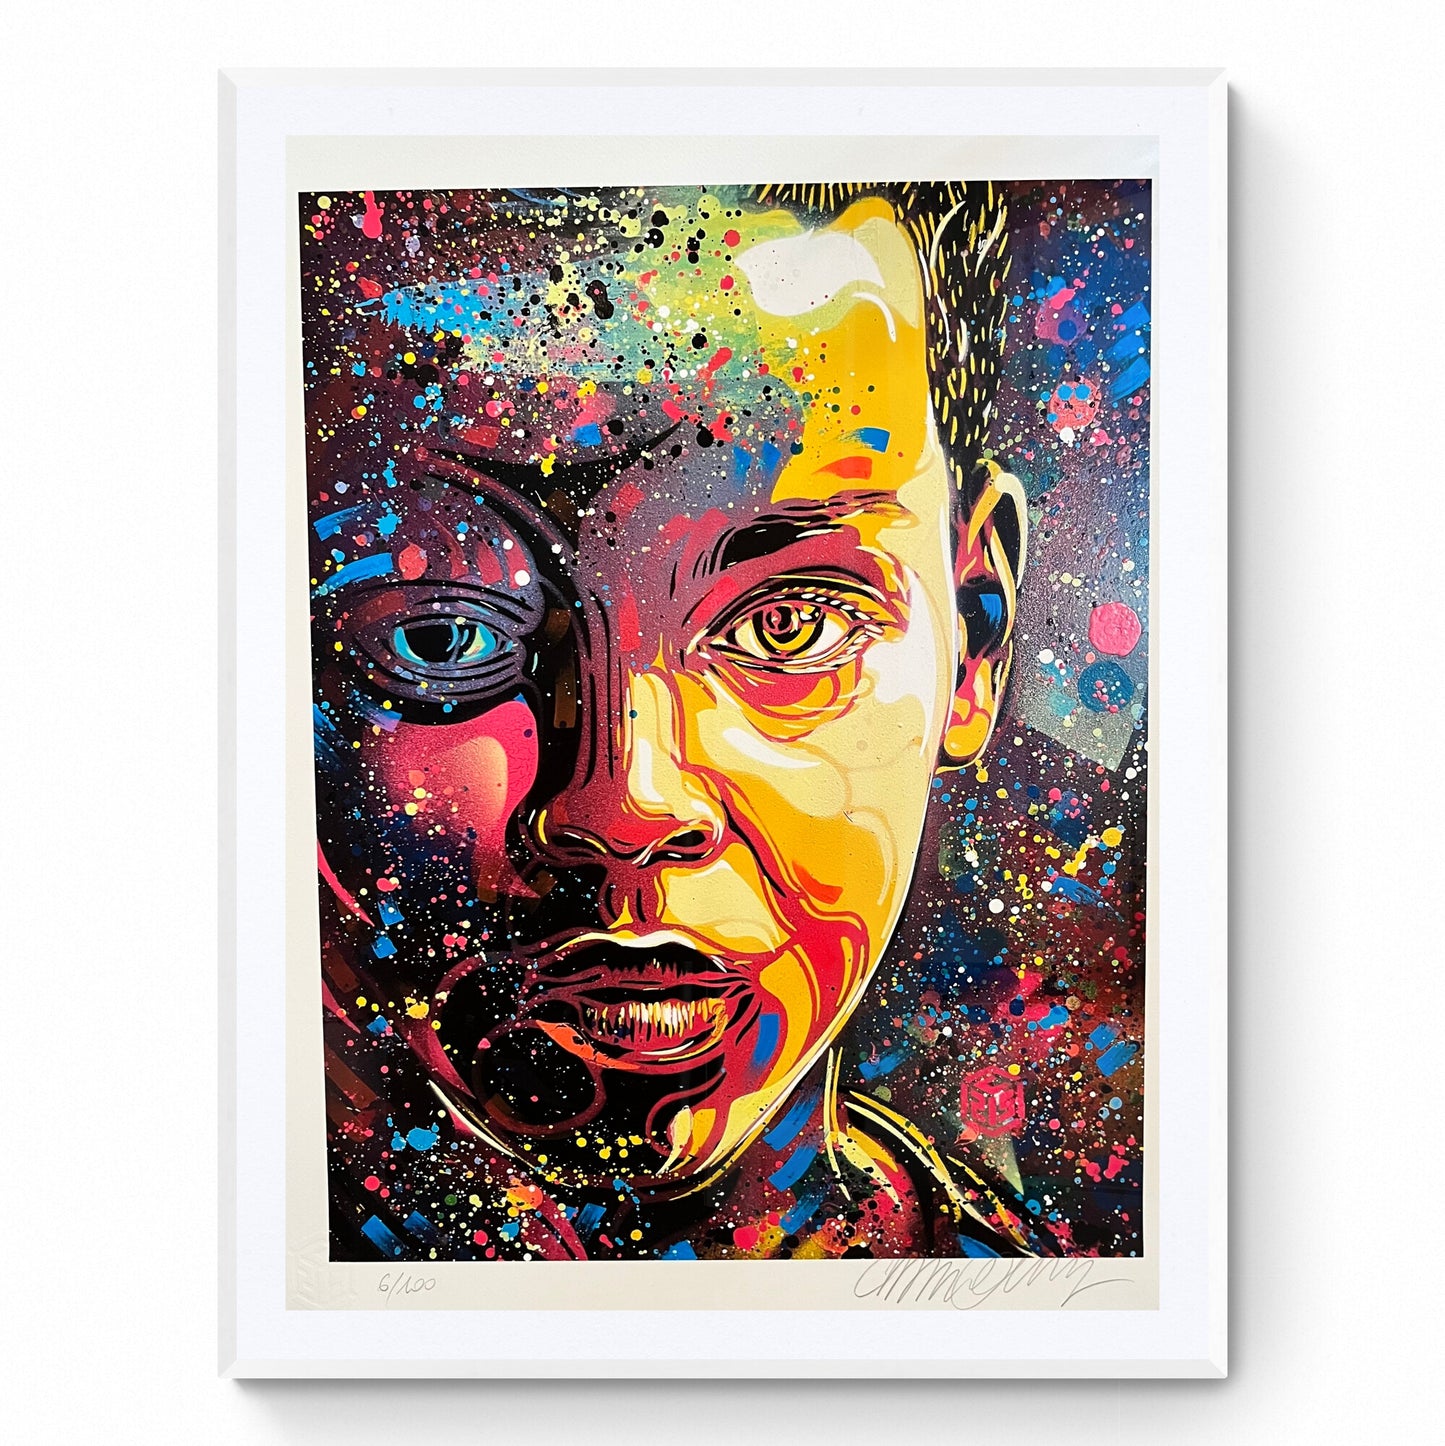 C215, Untitled, 2022, Lithograph